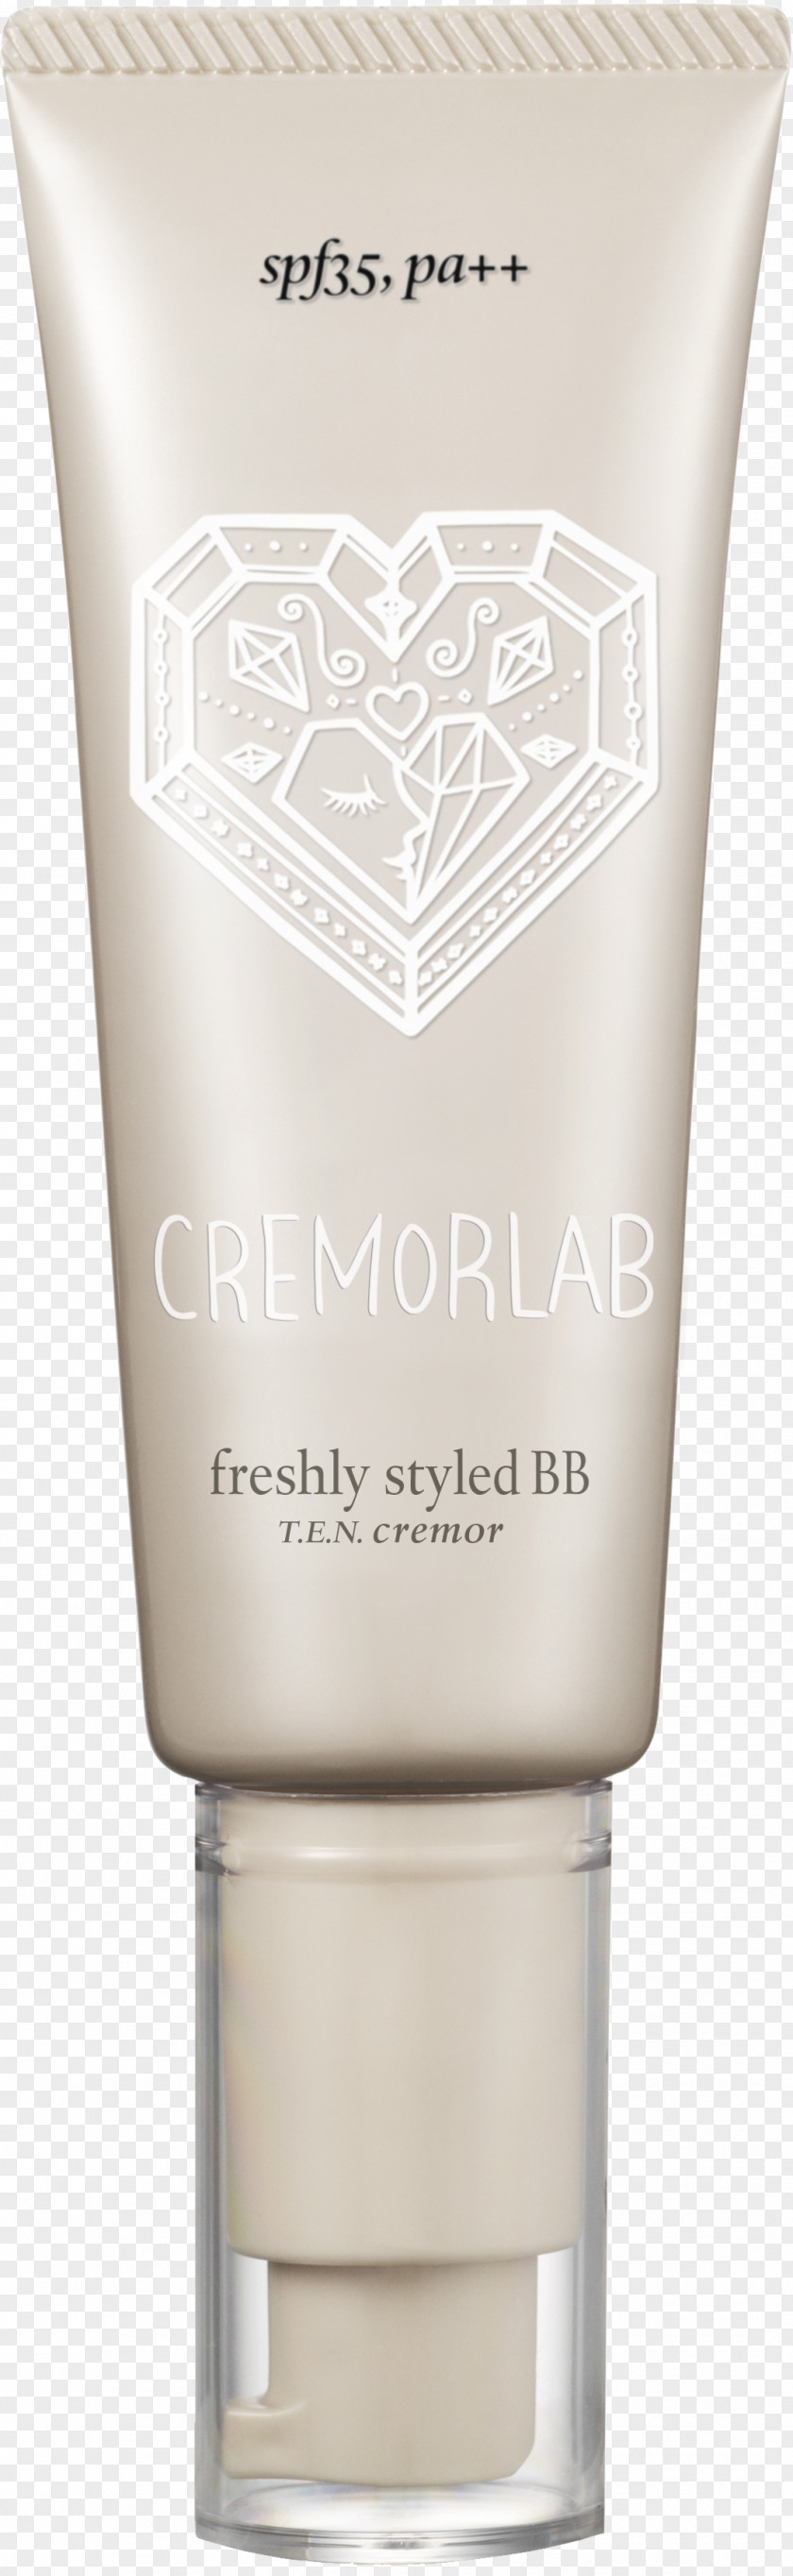 BB Cream Lotion Image Skincare The MAX Stem Cell Facial Cleanser Cosmetics PNG